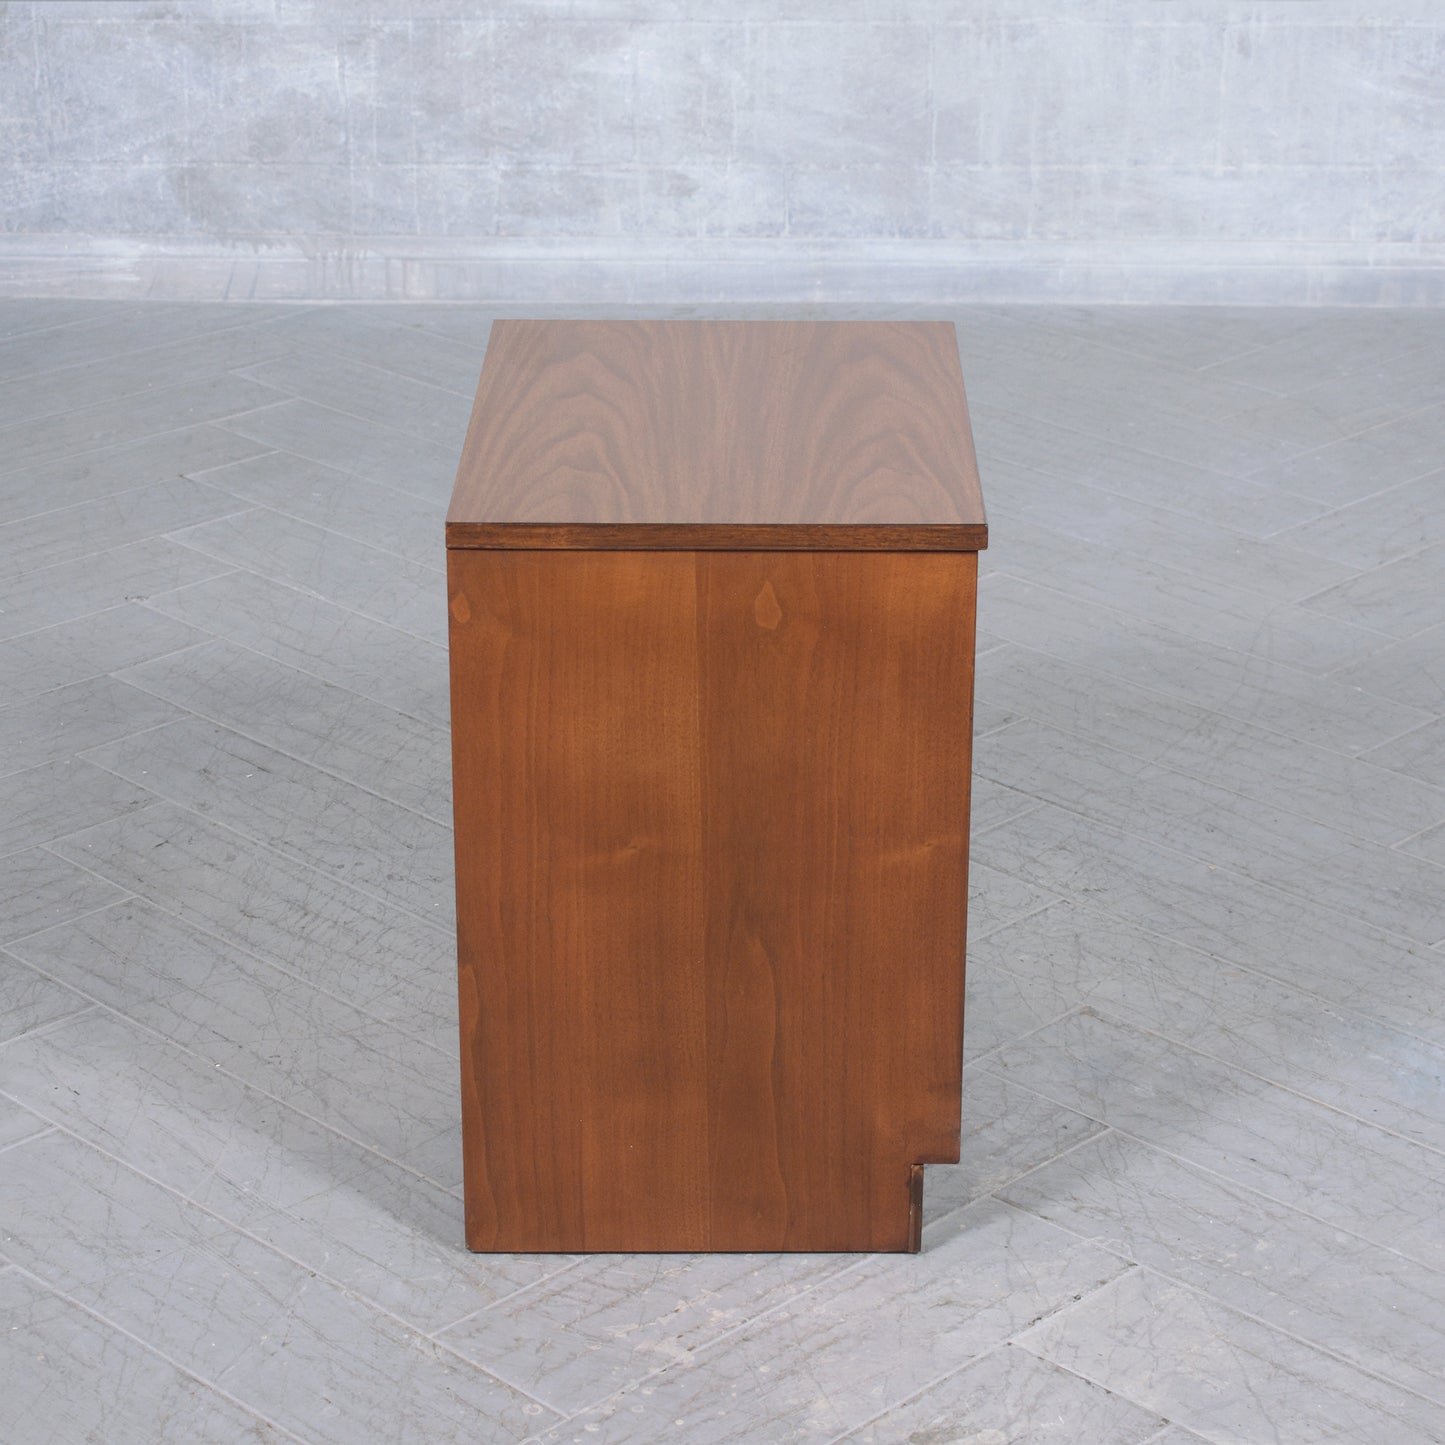 Restored 1960s Modern Walnut Nightstand: Dual-Tone with Unique Carved Handle